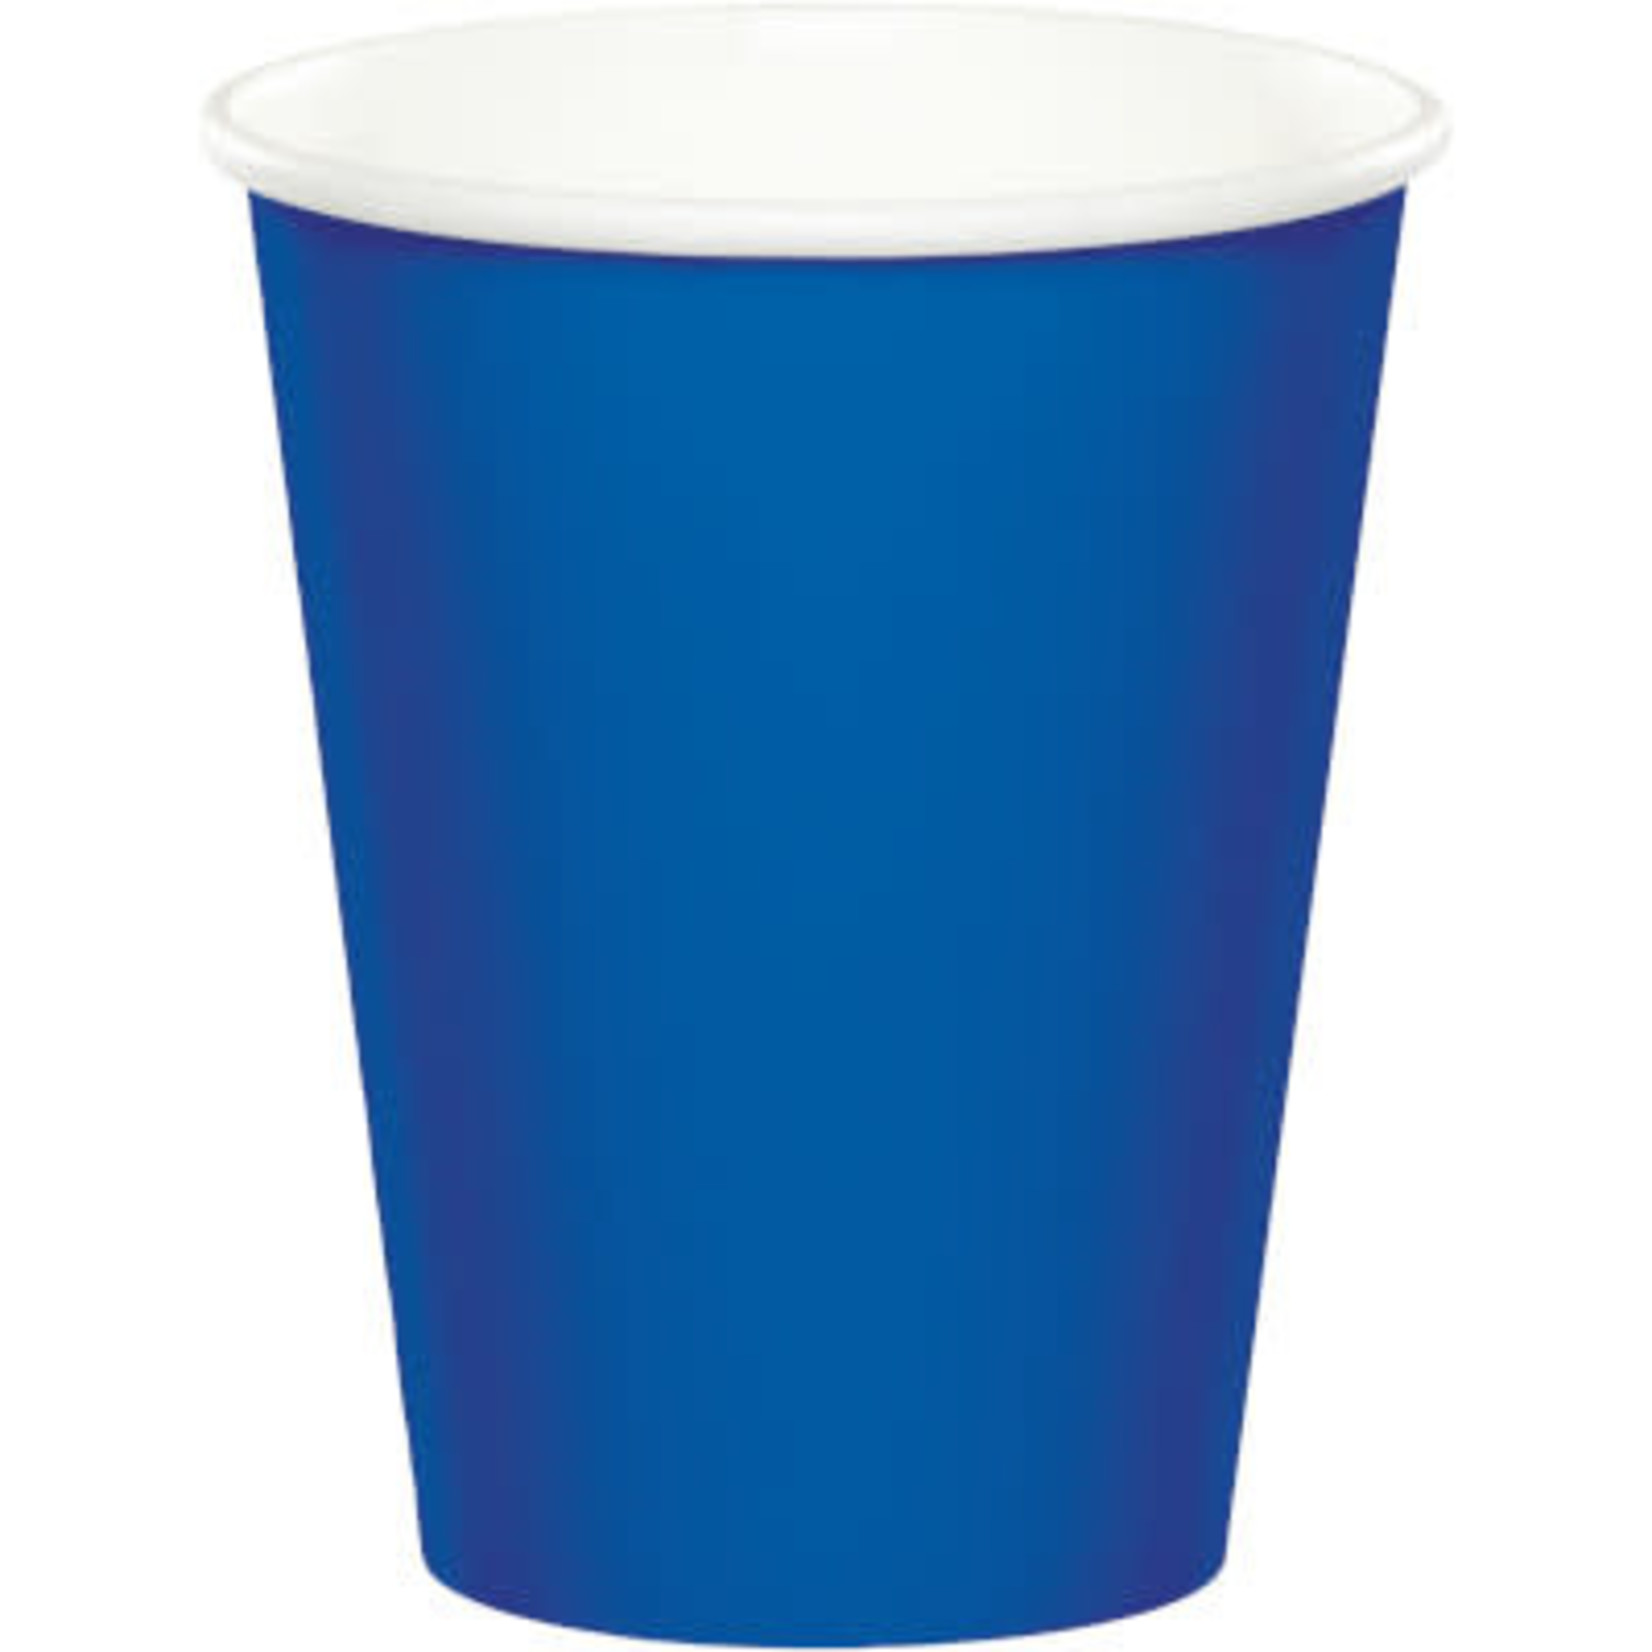 Touch of Color 9oz. Cobalt Blue Hot/Cold Paper Cups - 24ct.